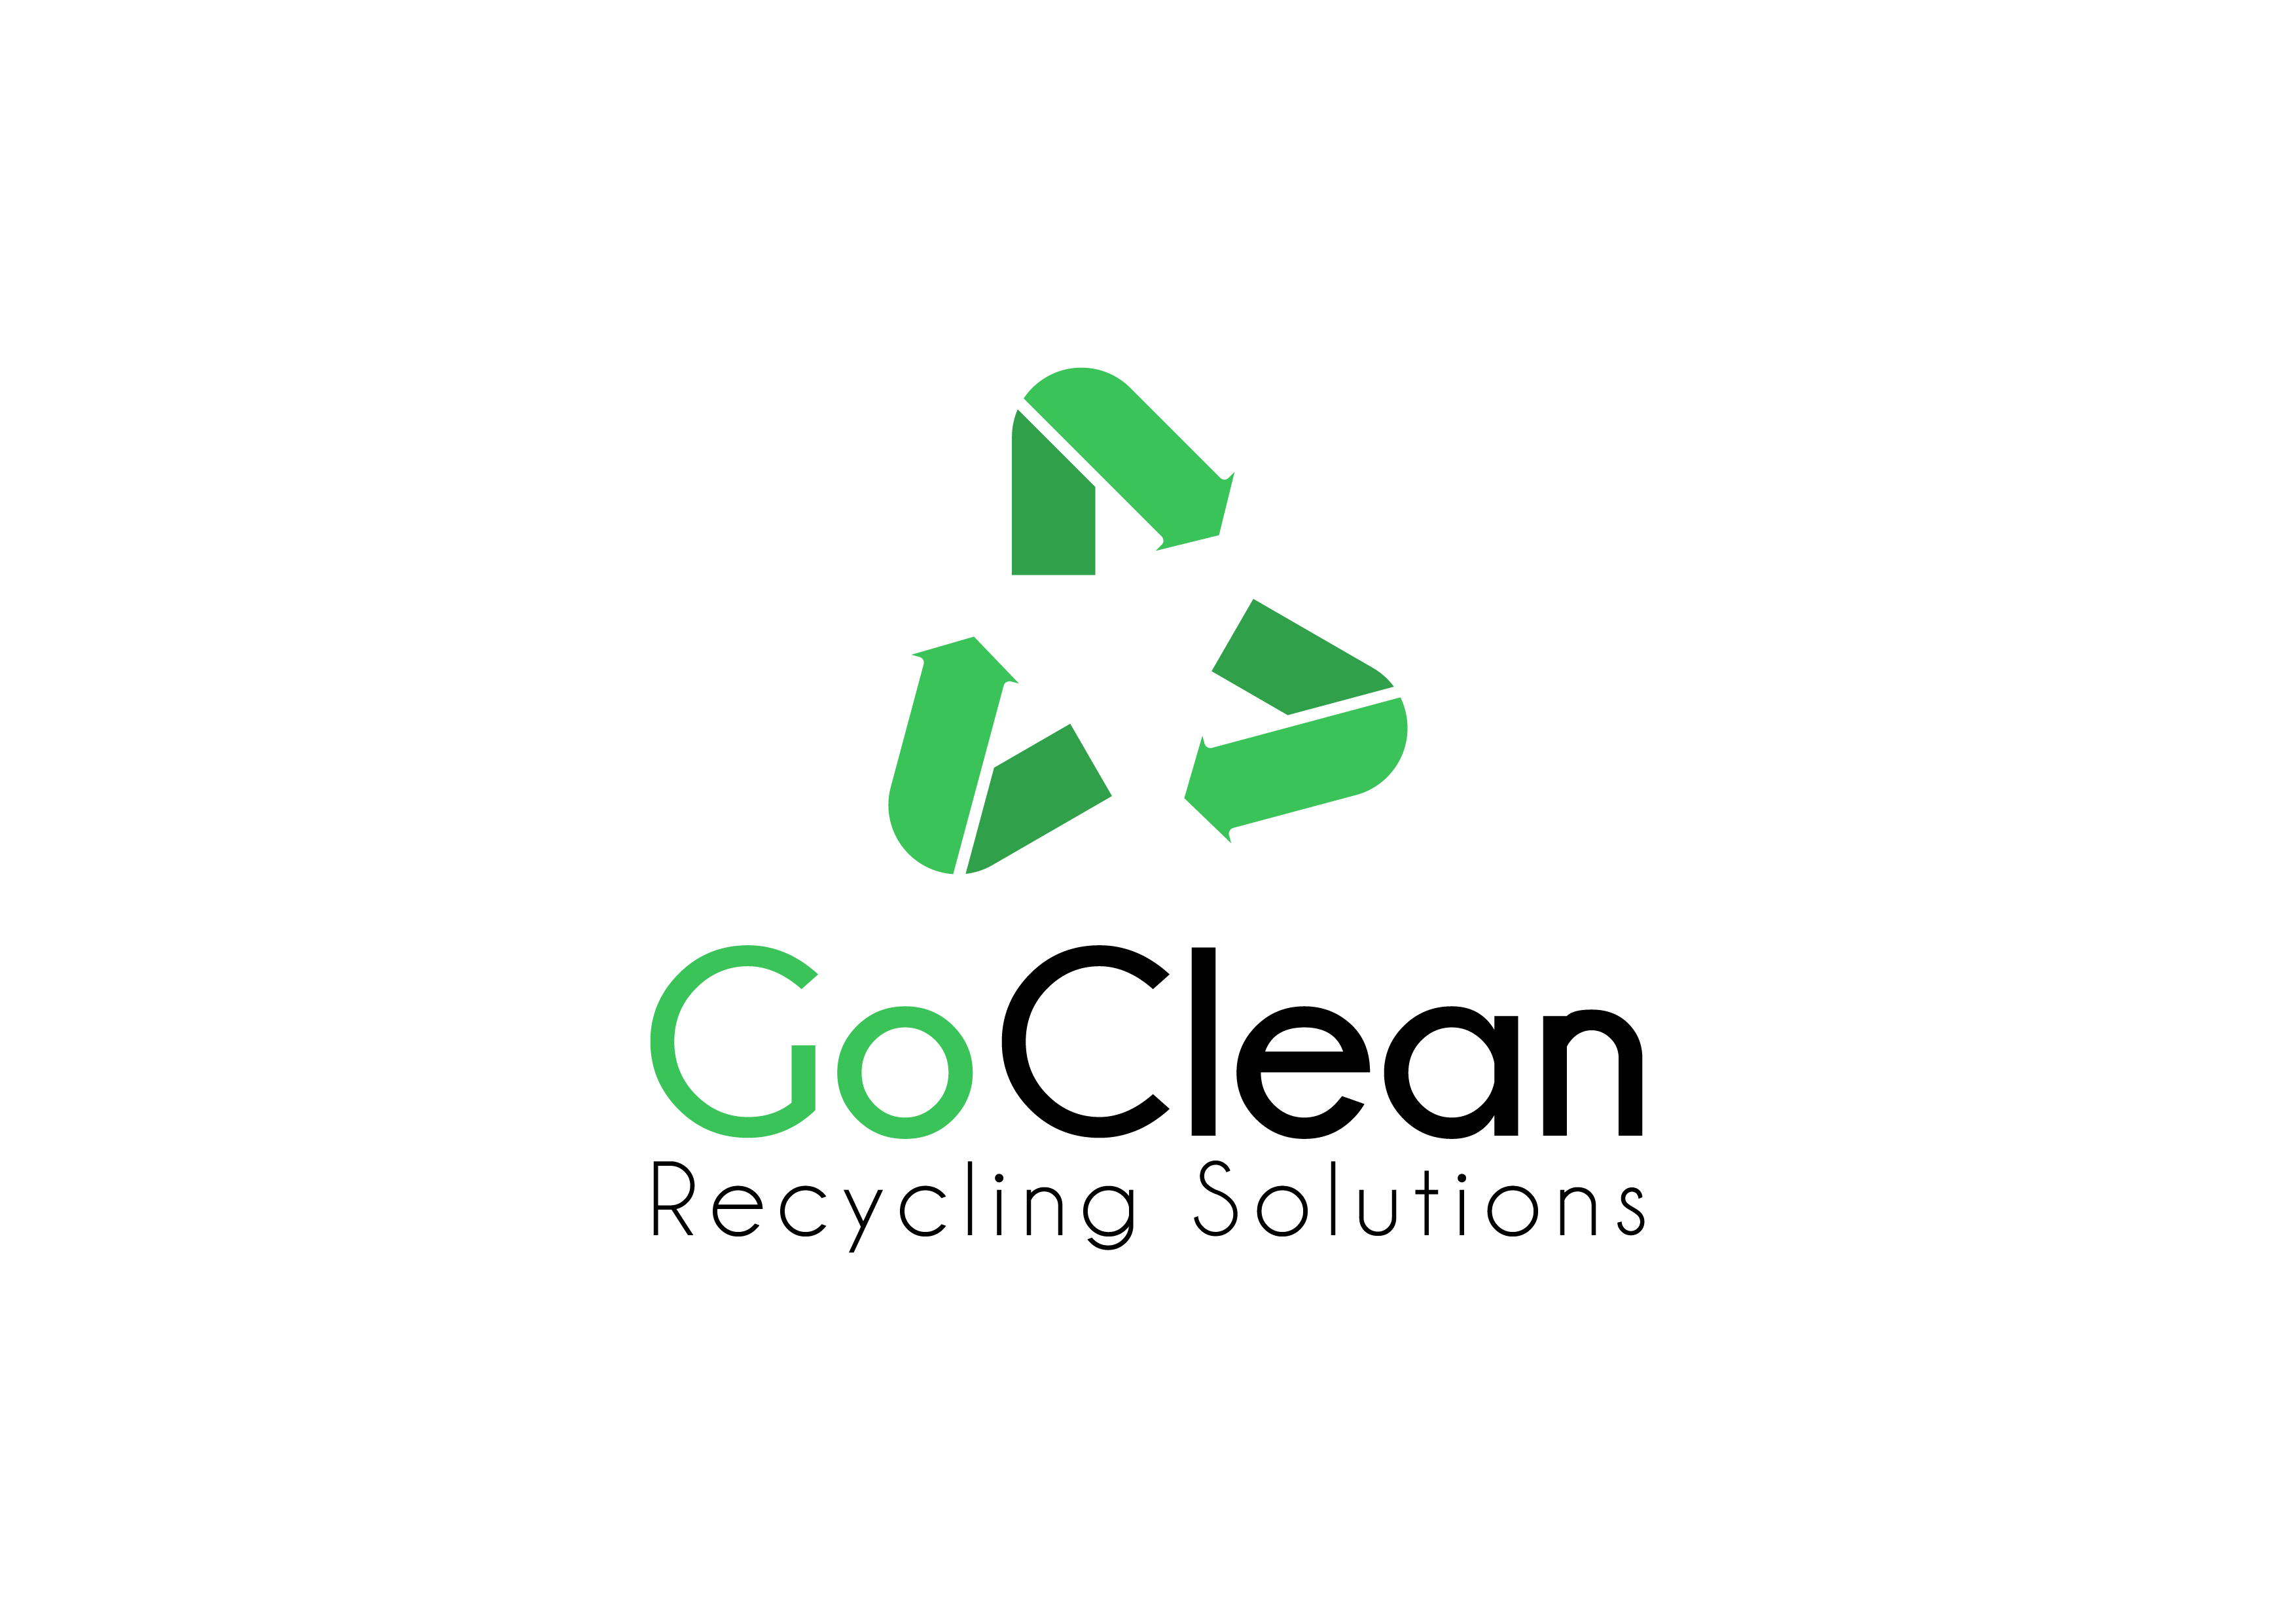 GoClean Recycling Solutions